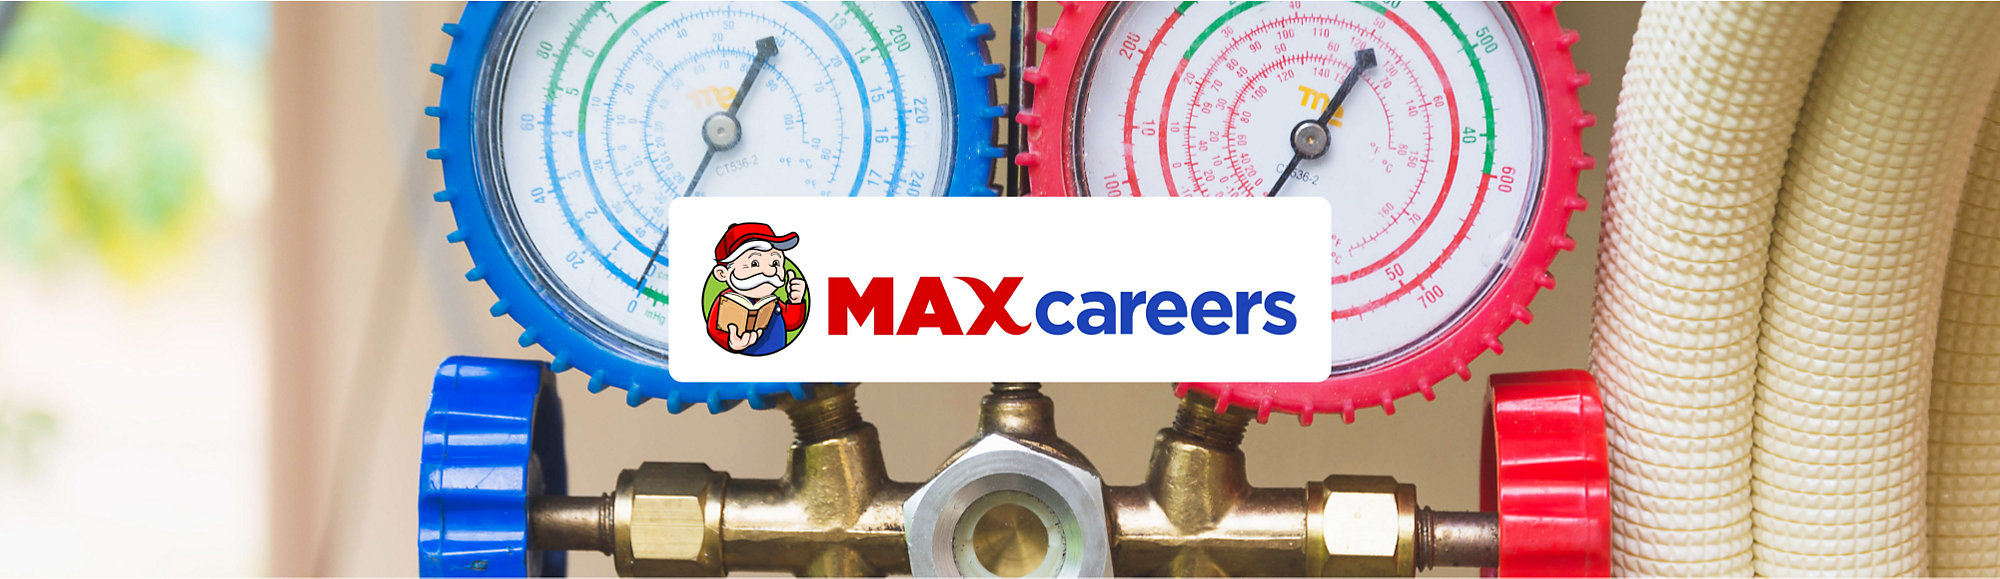 MAXcareers_Logo_Full_Color